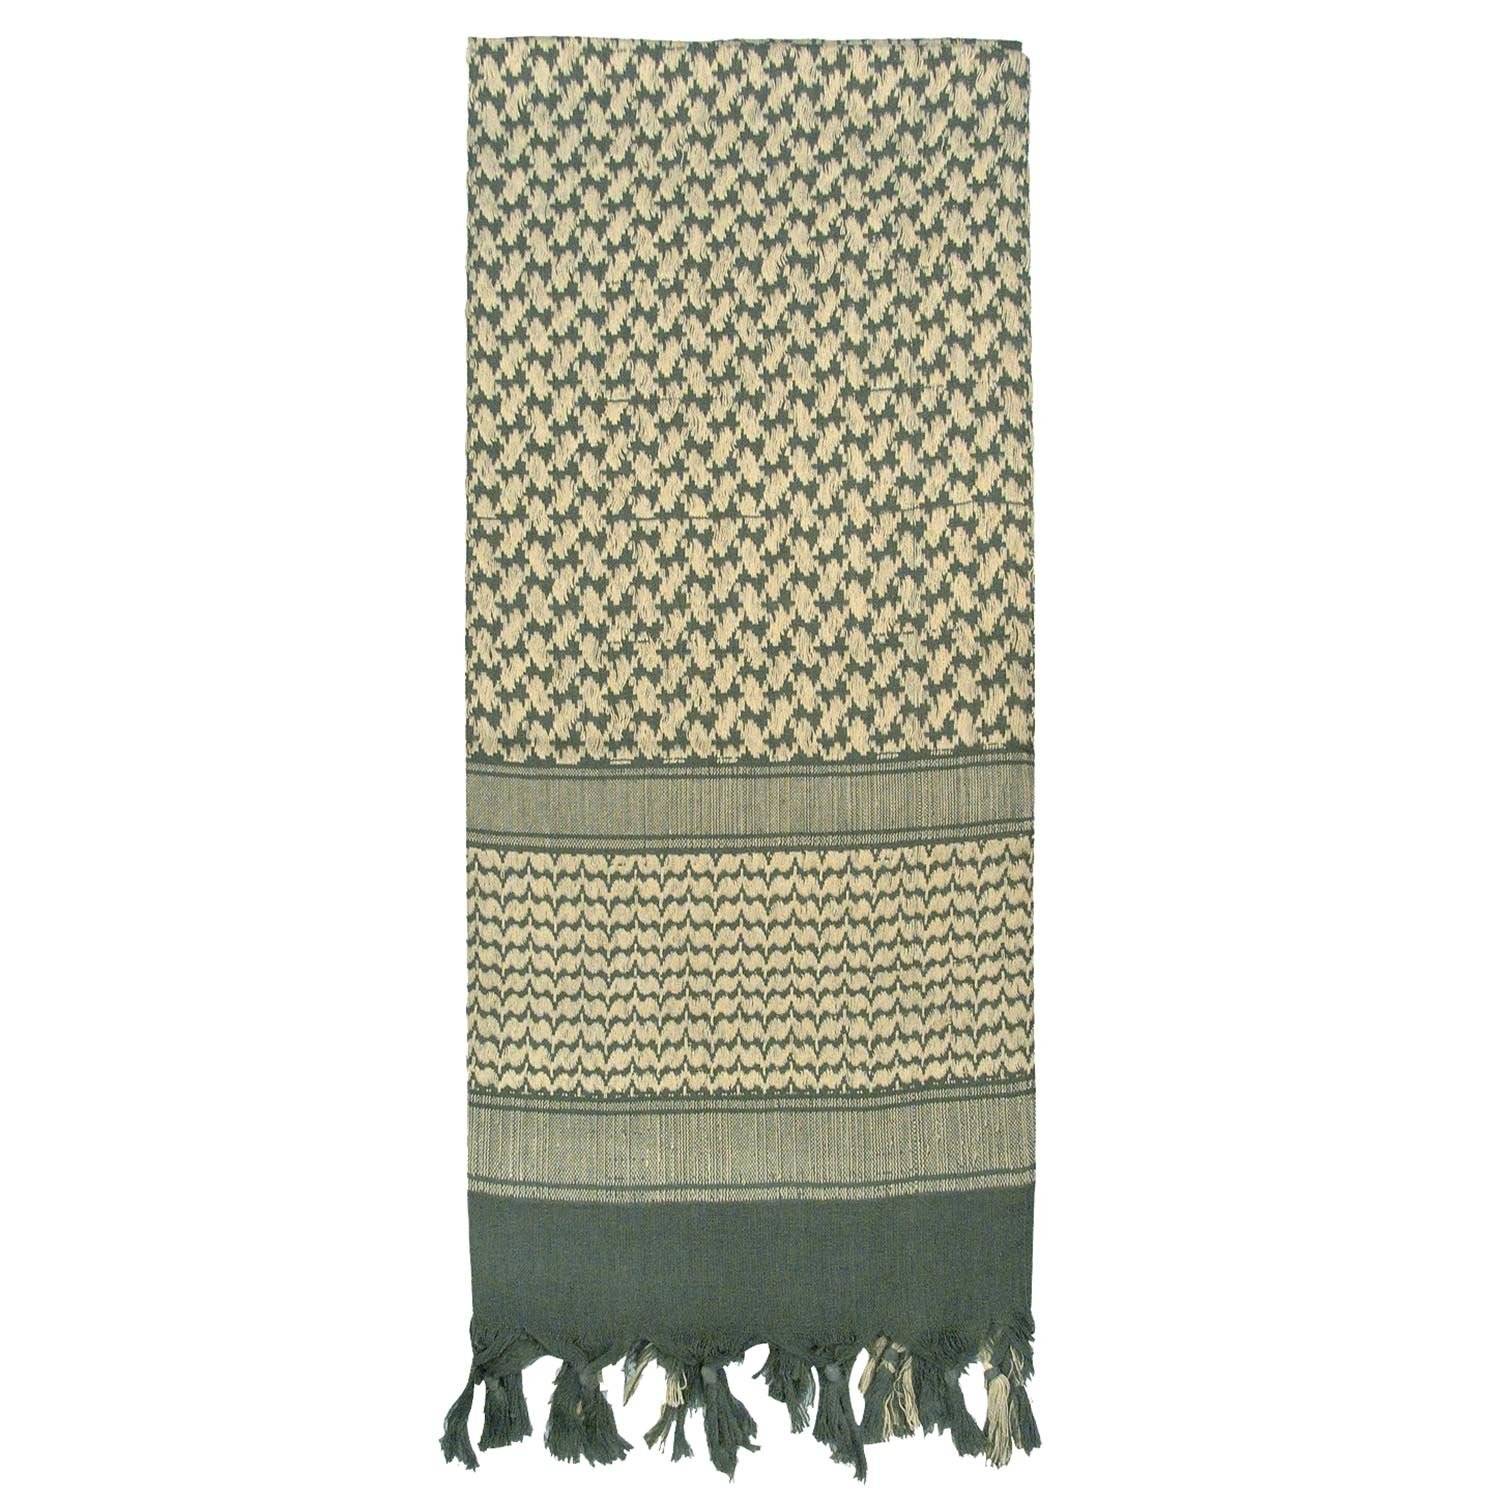 Rothco Deluxe Shemagh Scarf